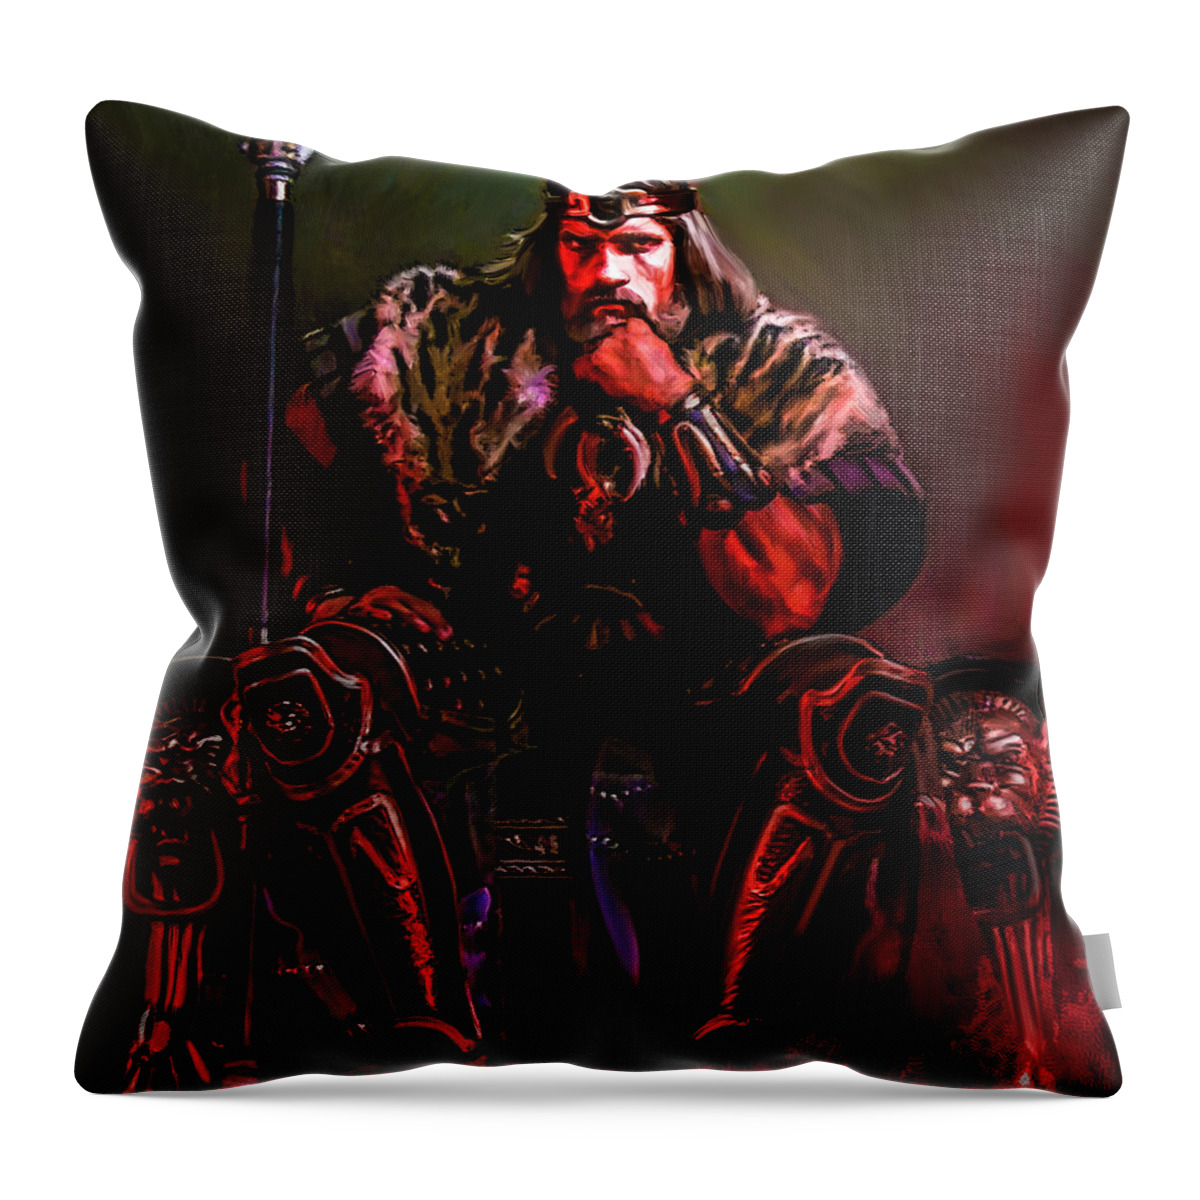 Conan The Barbarian Throw Pillow featuring the painting Conan The Barbarian Painting Print by Stephen Humphries